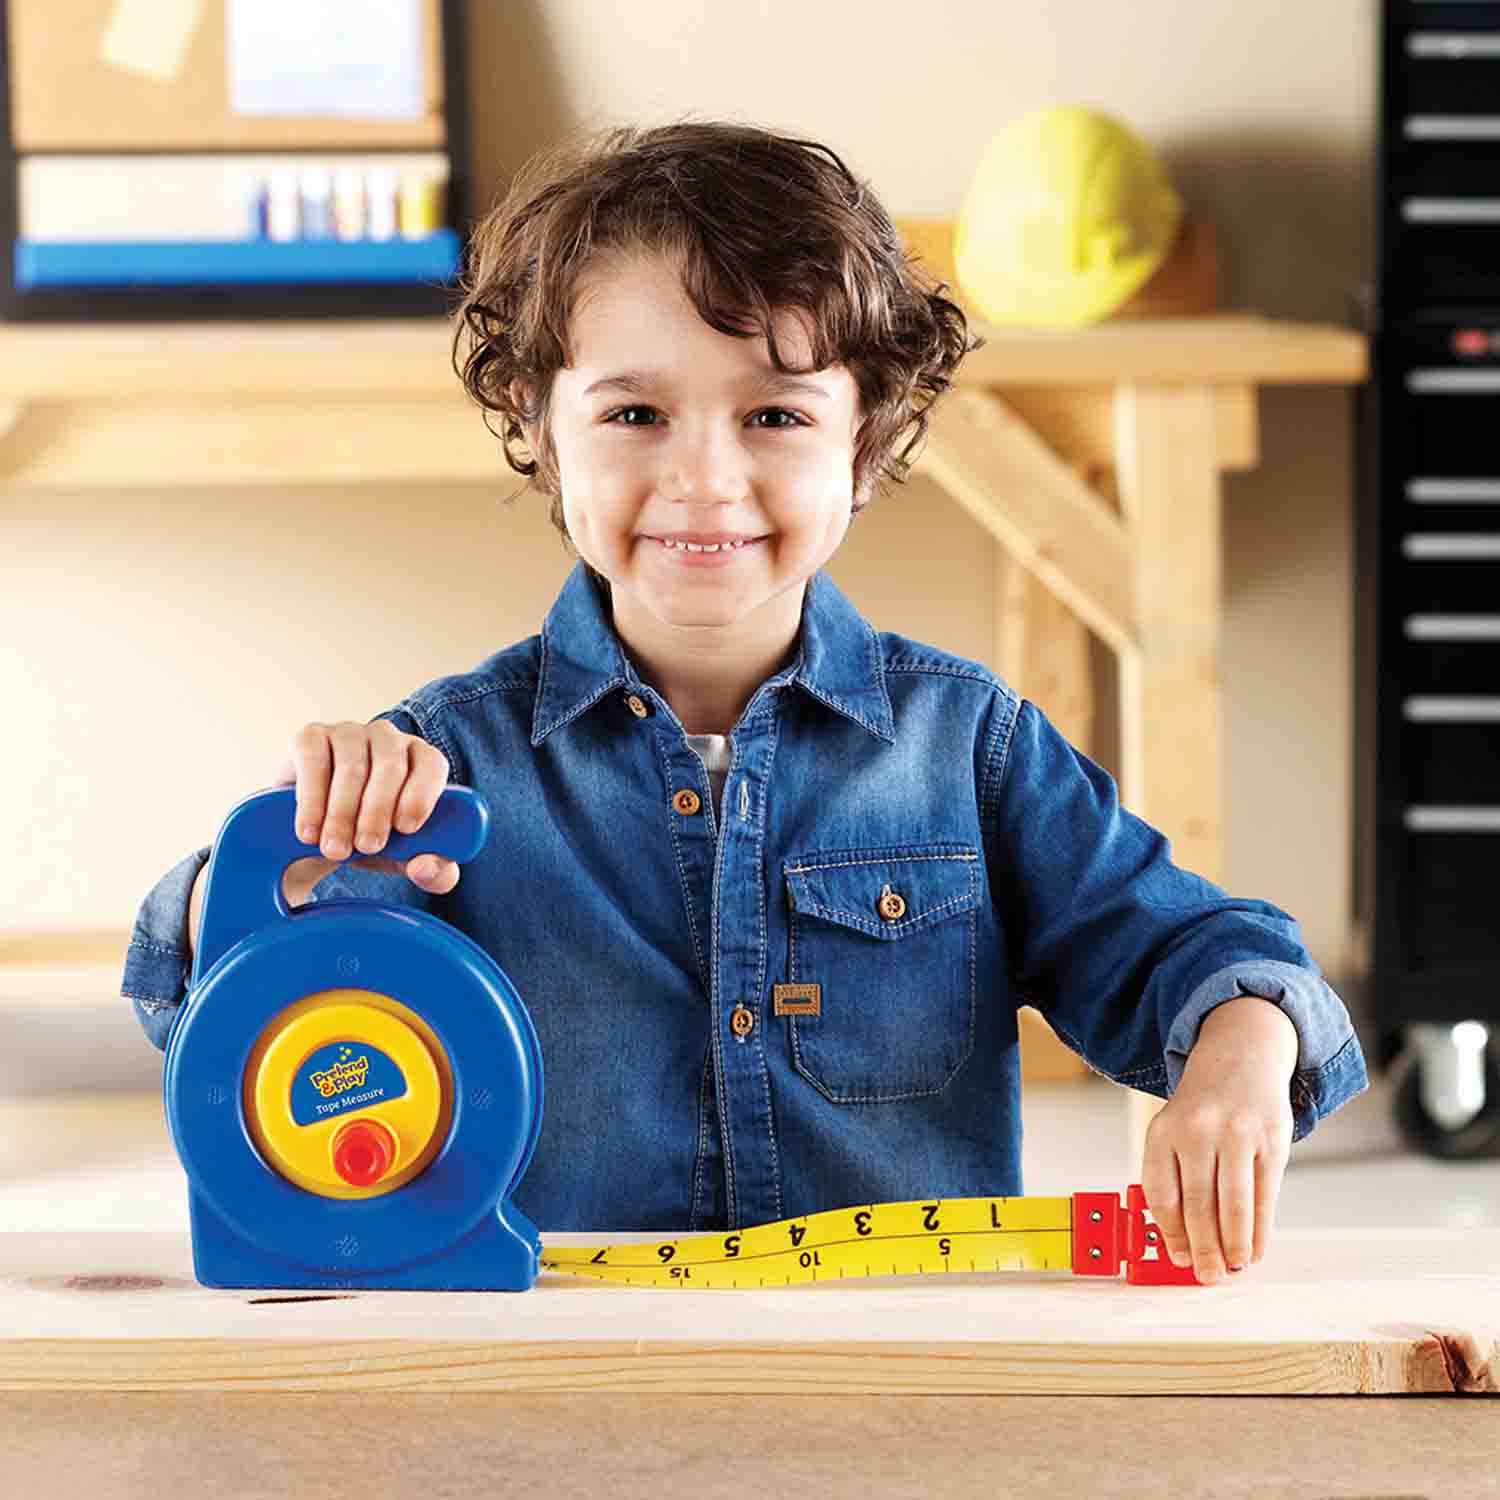 My Big Tape Measure Childs First DIY Tape Measure Kids Learning Role Play Toy 